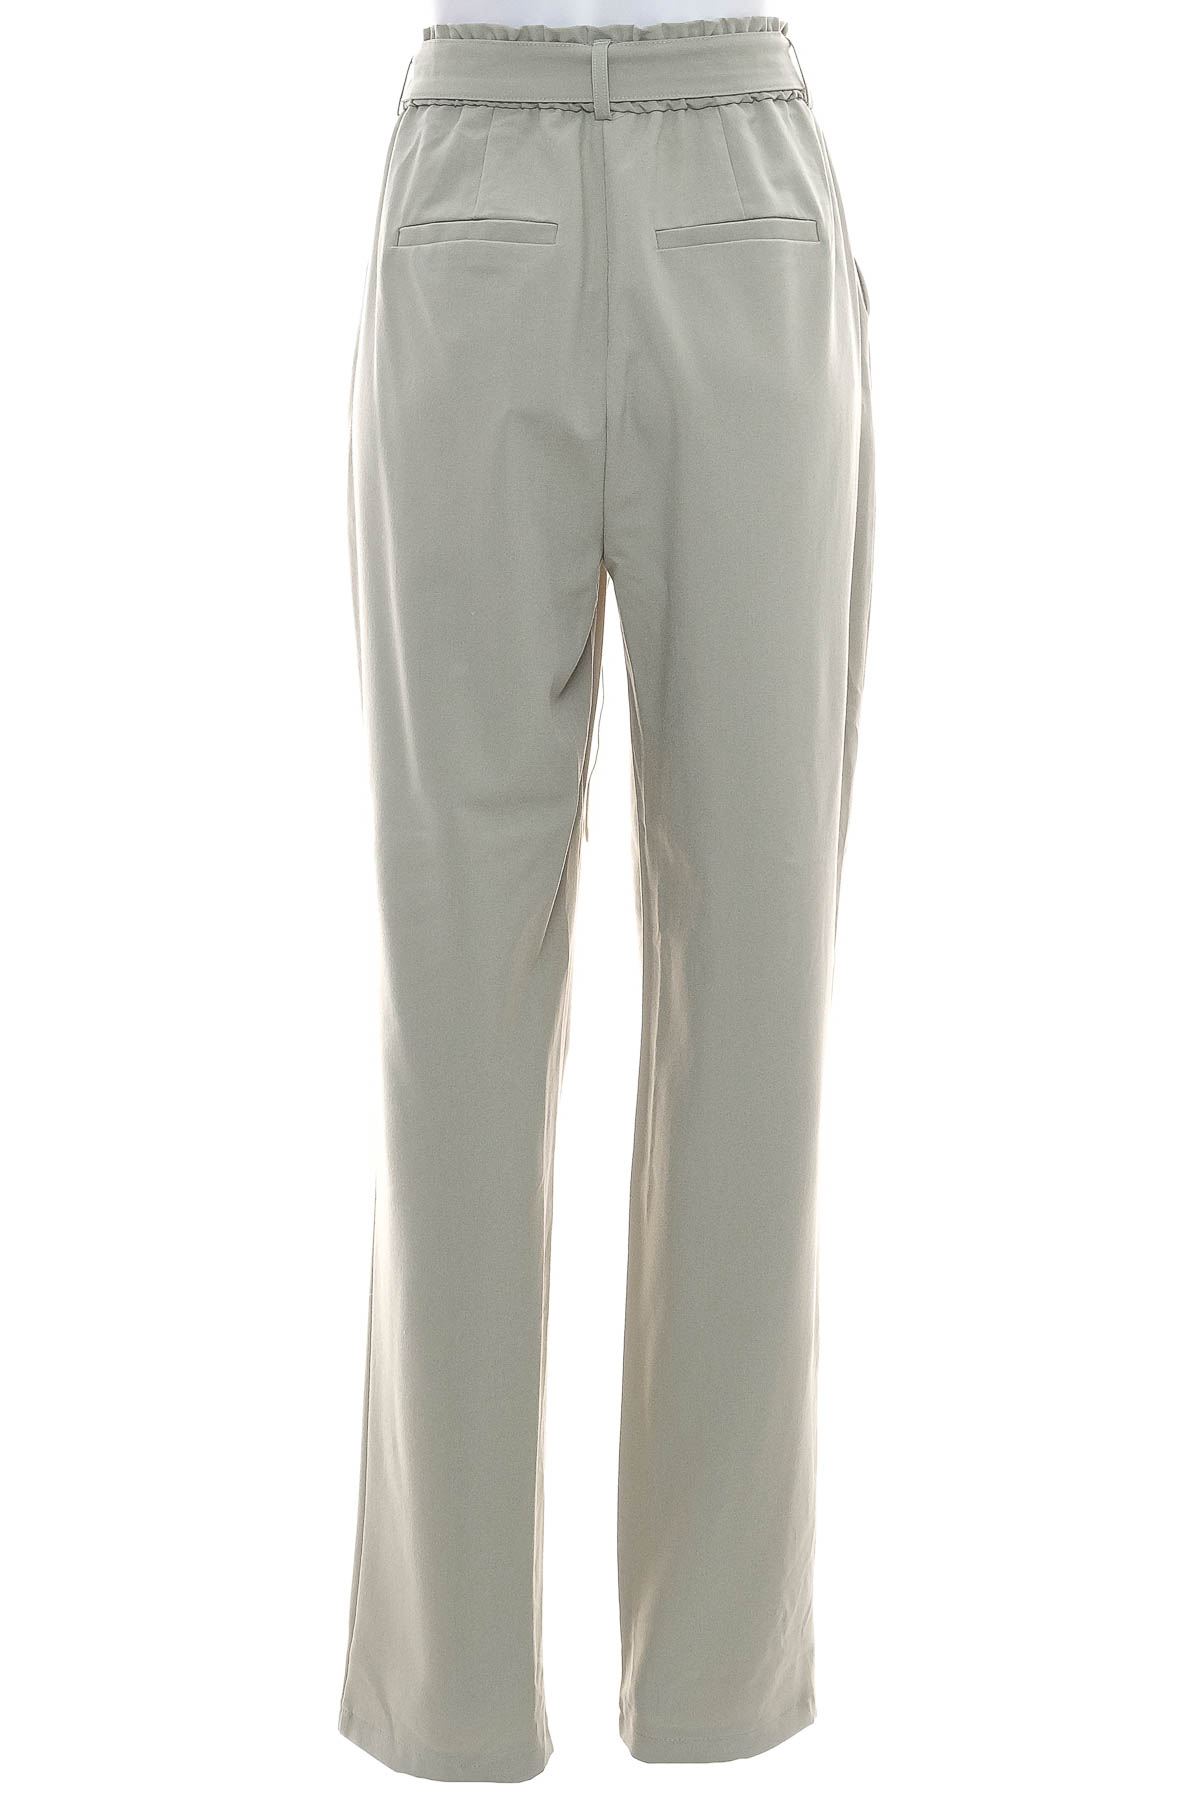 Women's trousers - Pieces - 1